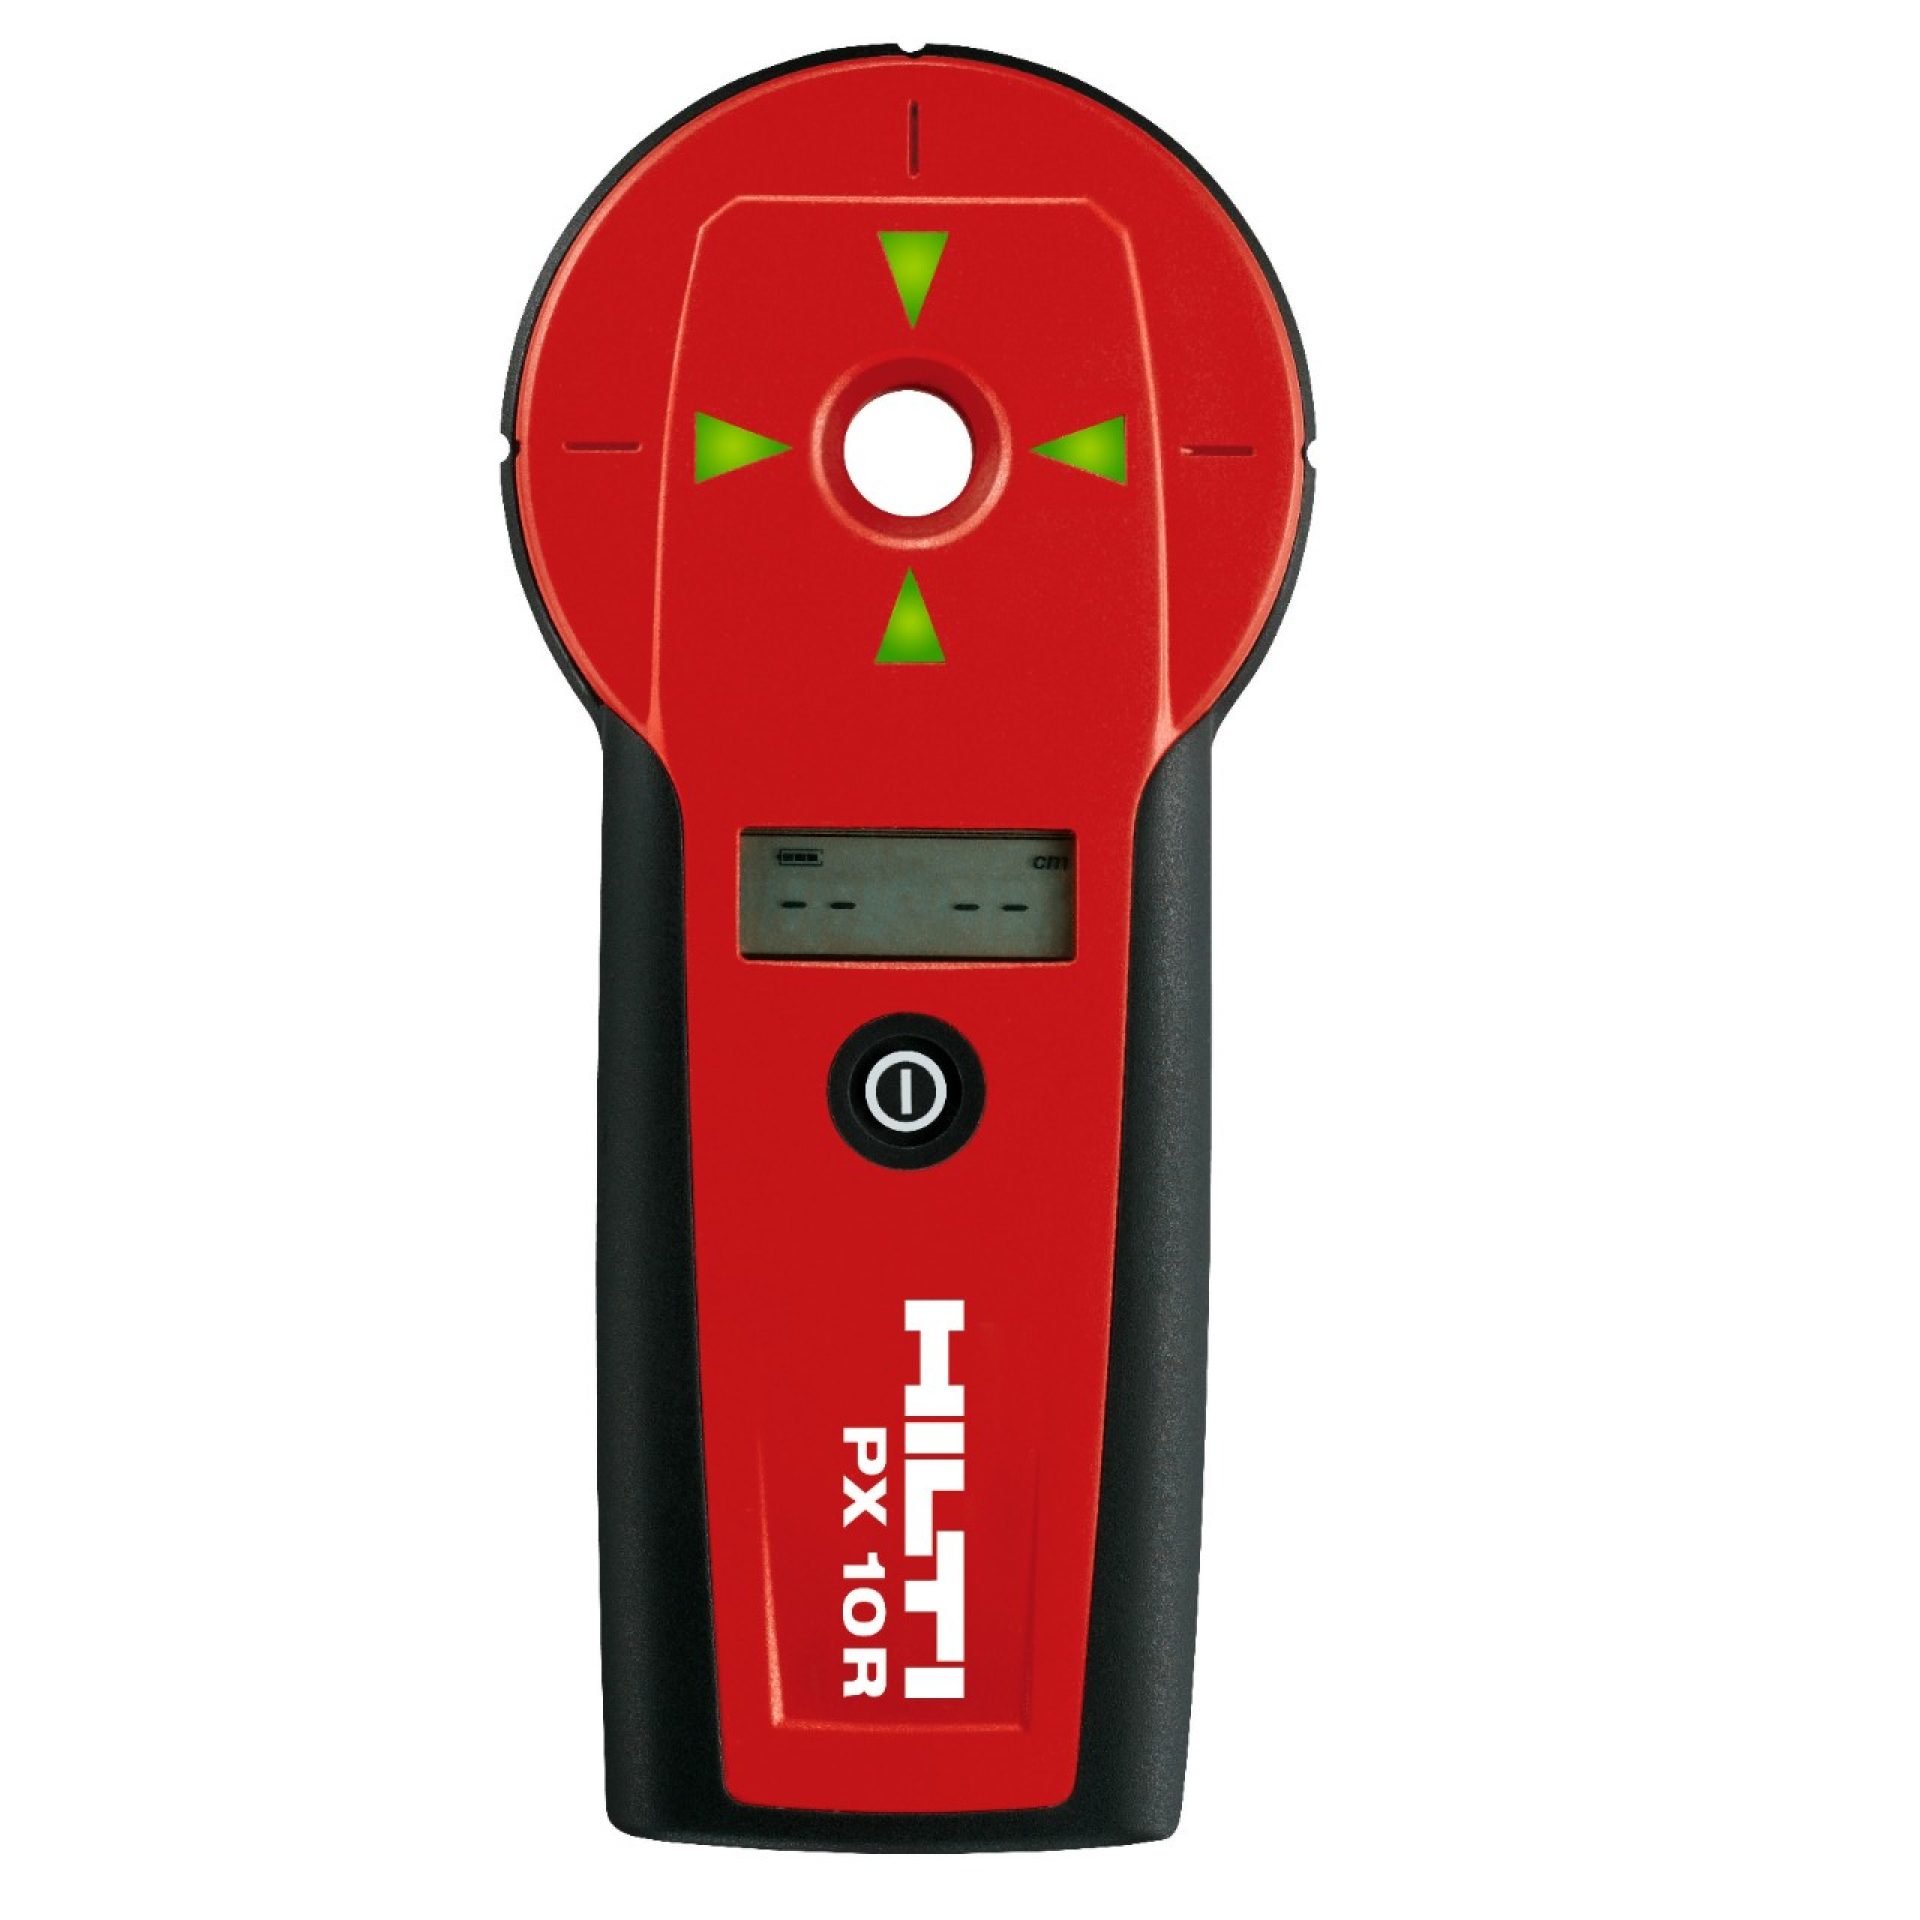 PX 10 Transpointer to locate drilling entry and exit holes without hitting hidden objects